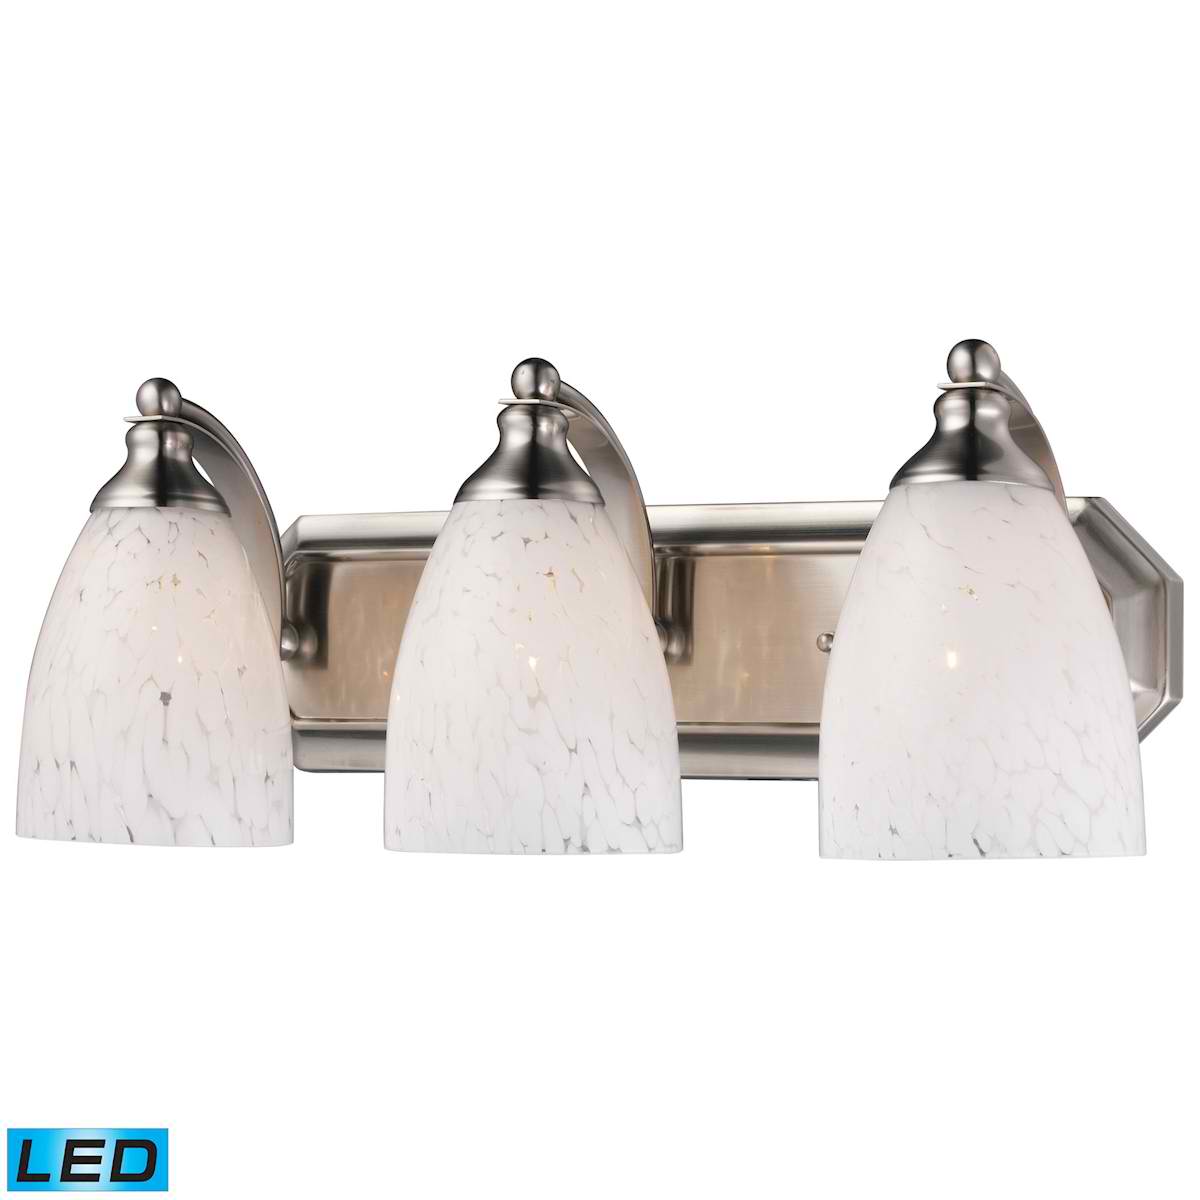 3 Light Vanity in Satin Nickel and Snow White Glass - LED, 800 Lumens (2400 Lumens Total) with Full Scale